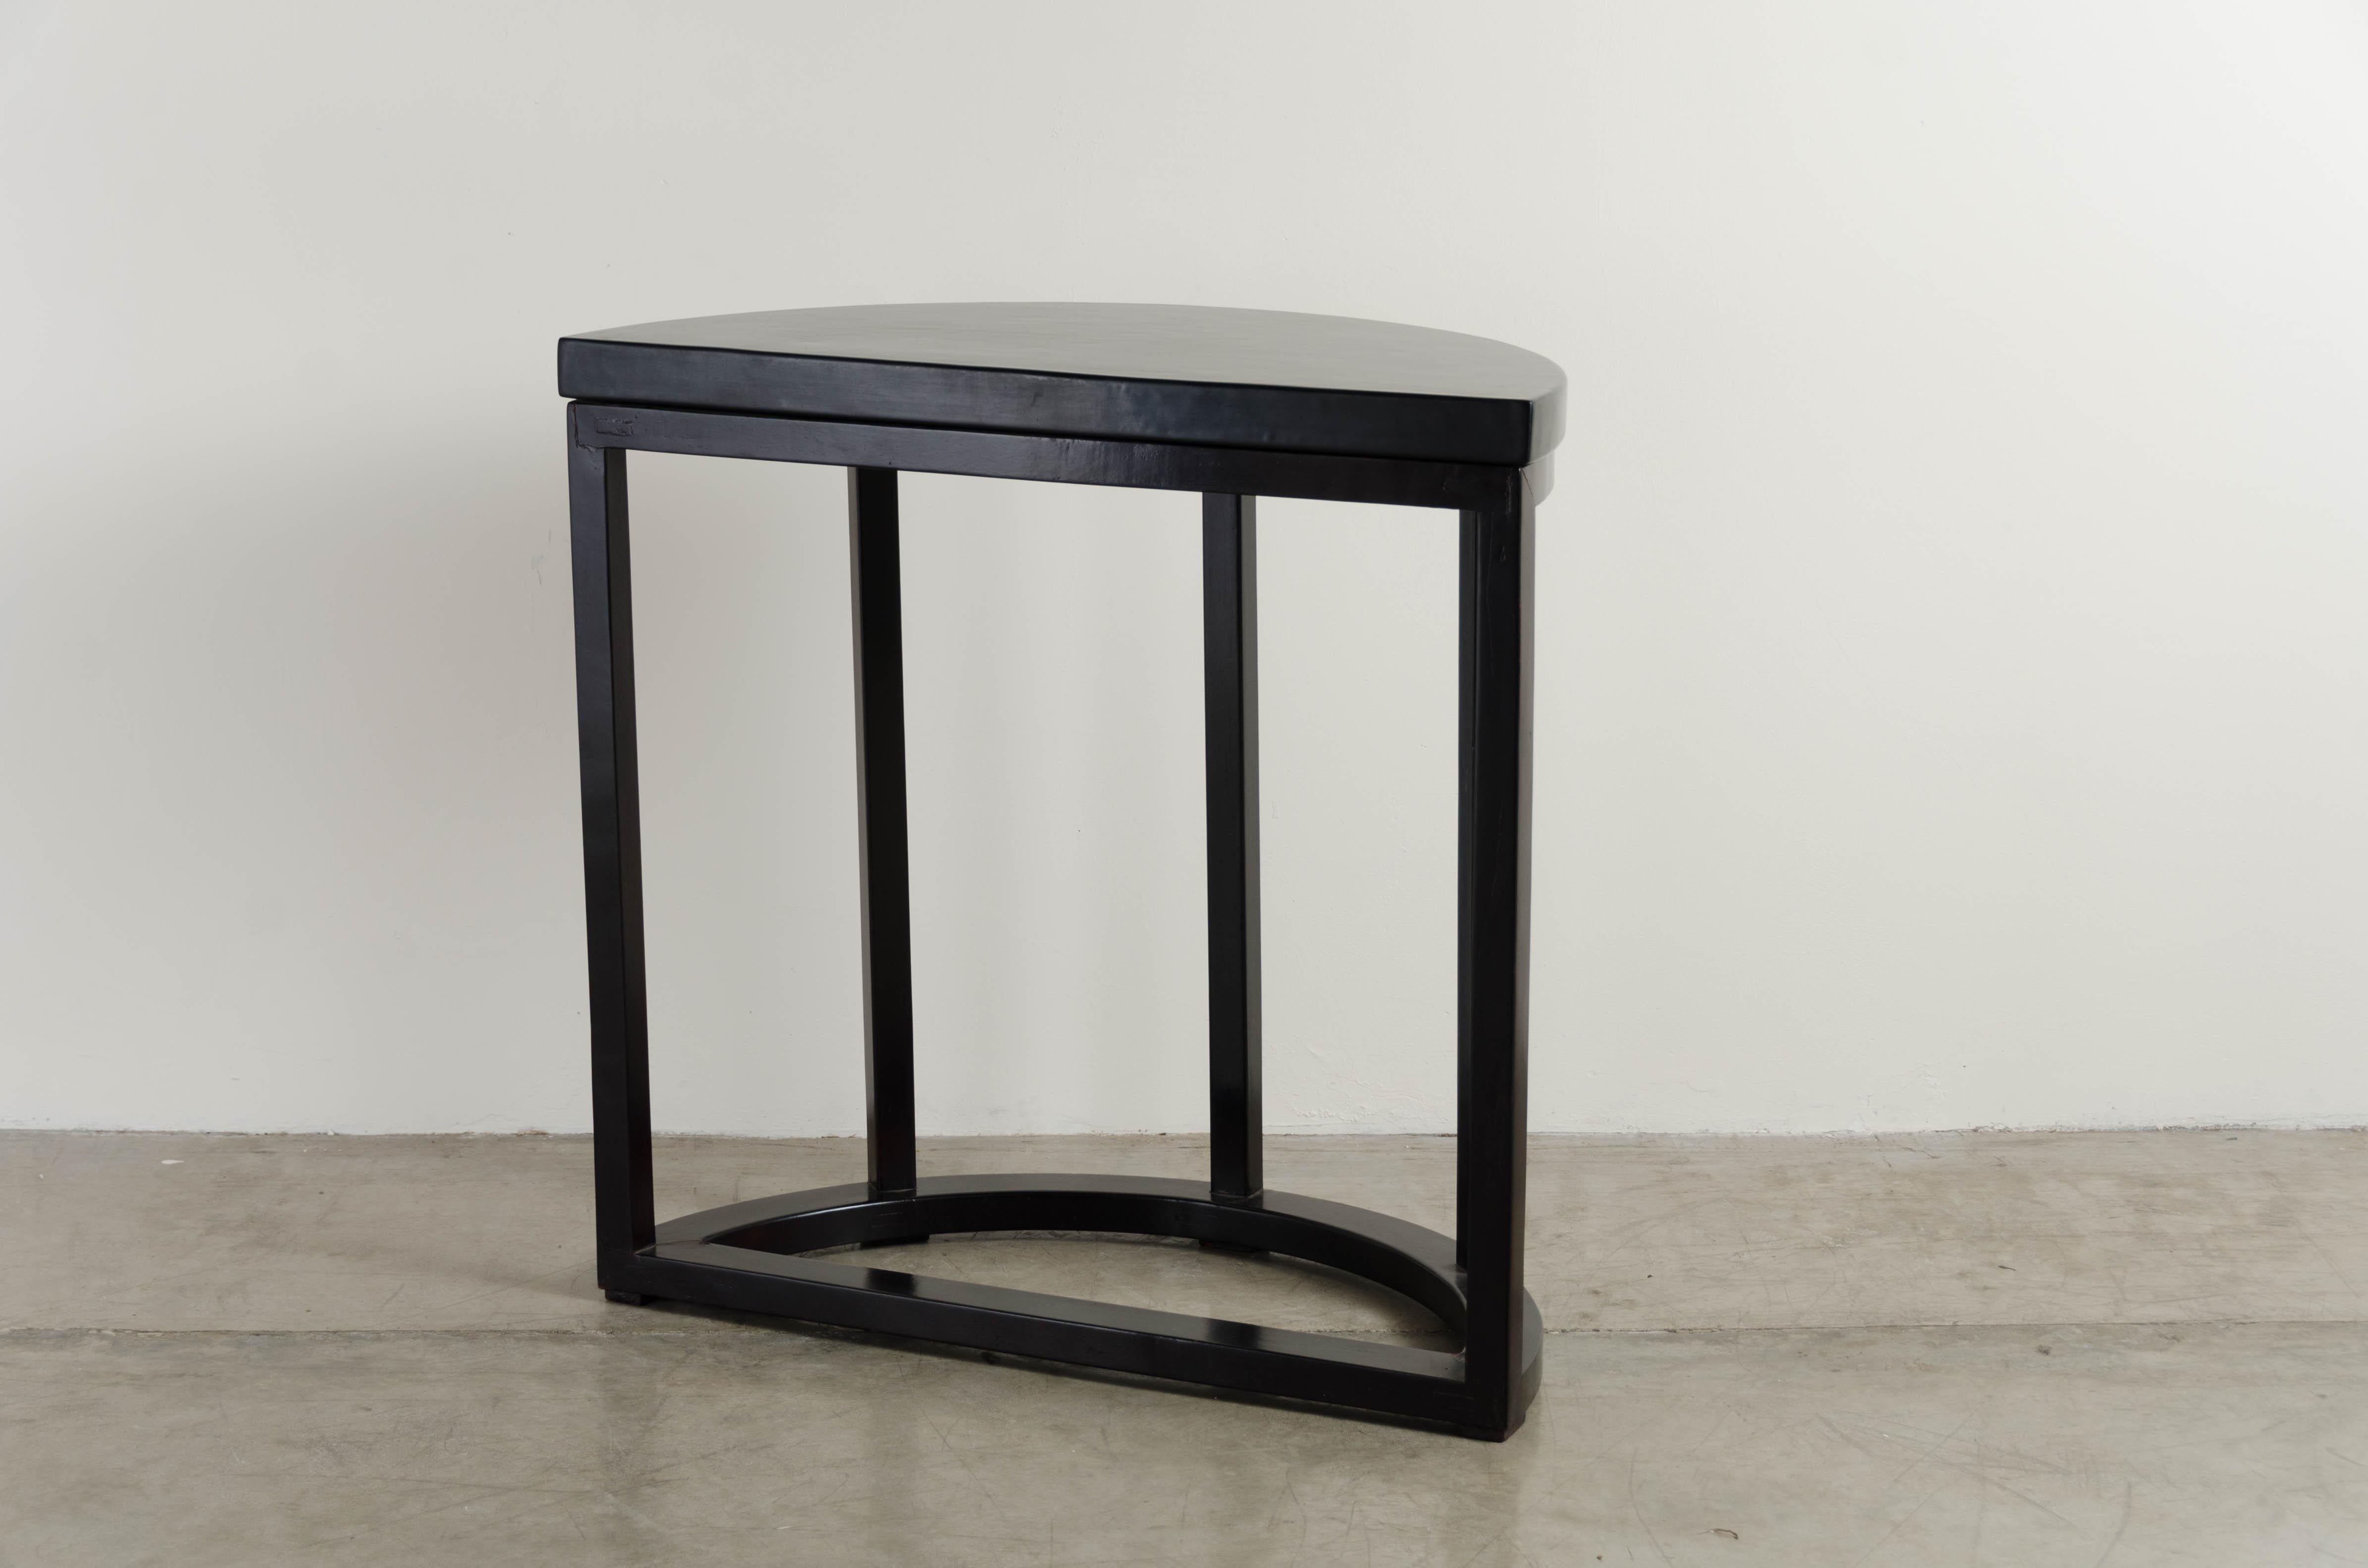 Contemporary Half Round Table, Black Lacquer by Robert Kuo, Handmade, Limited Edition For Sale